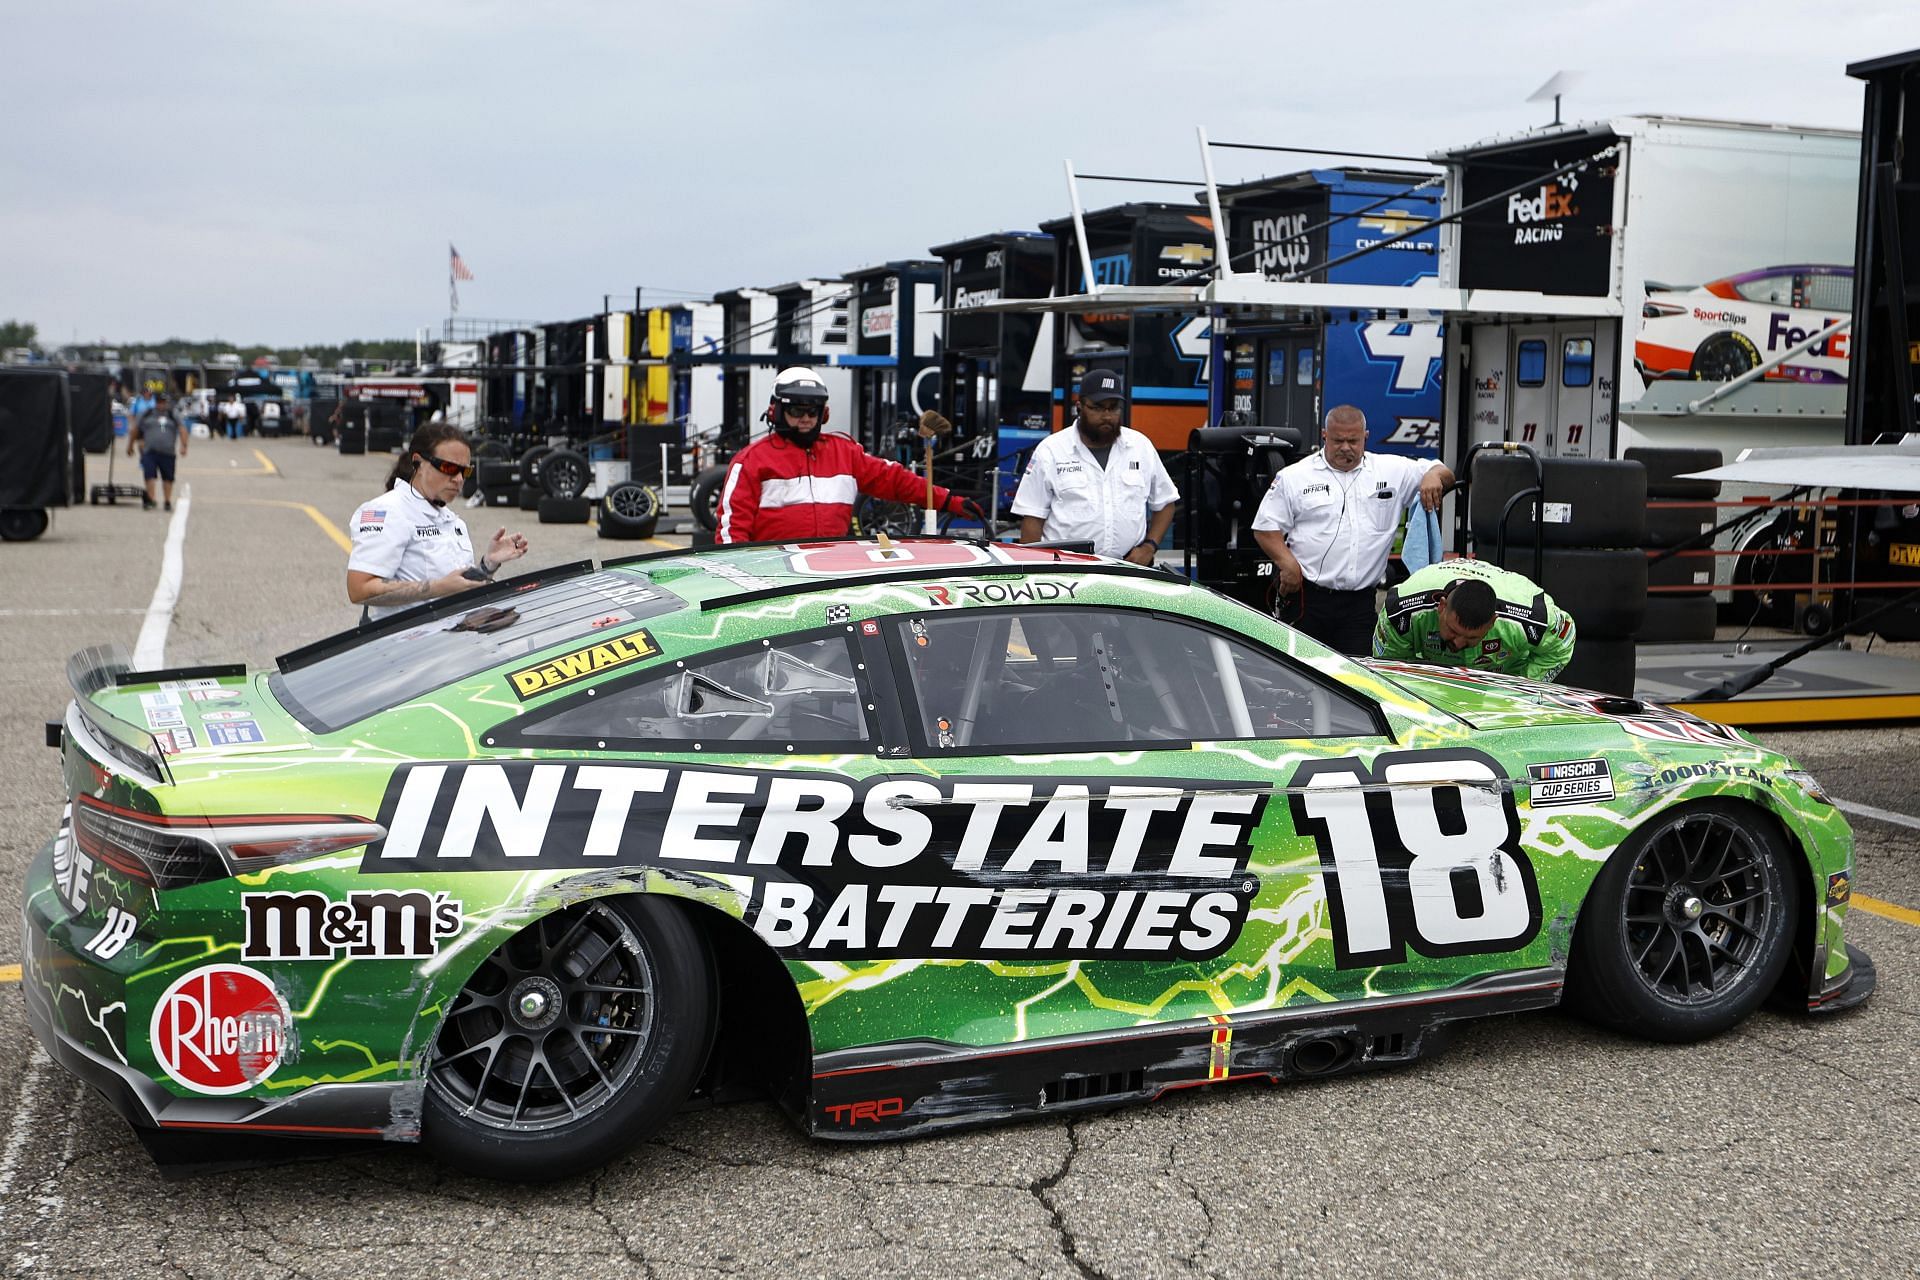 The #18 Interstate Batteries Toyota, driven by Kyle Busch sits in the garage area after an on-track incident during the NASCAR Cup Series FireKeepers Casino 400 at Michigan International Speedway